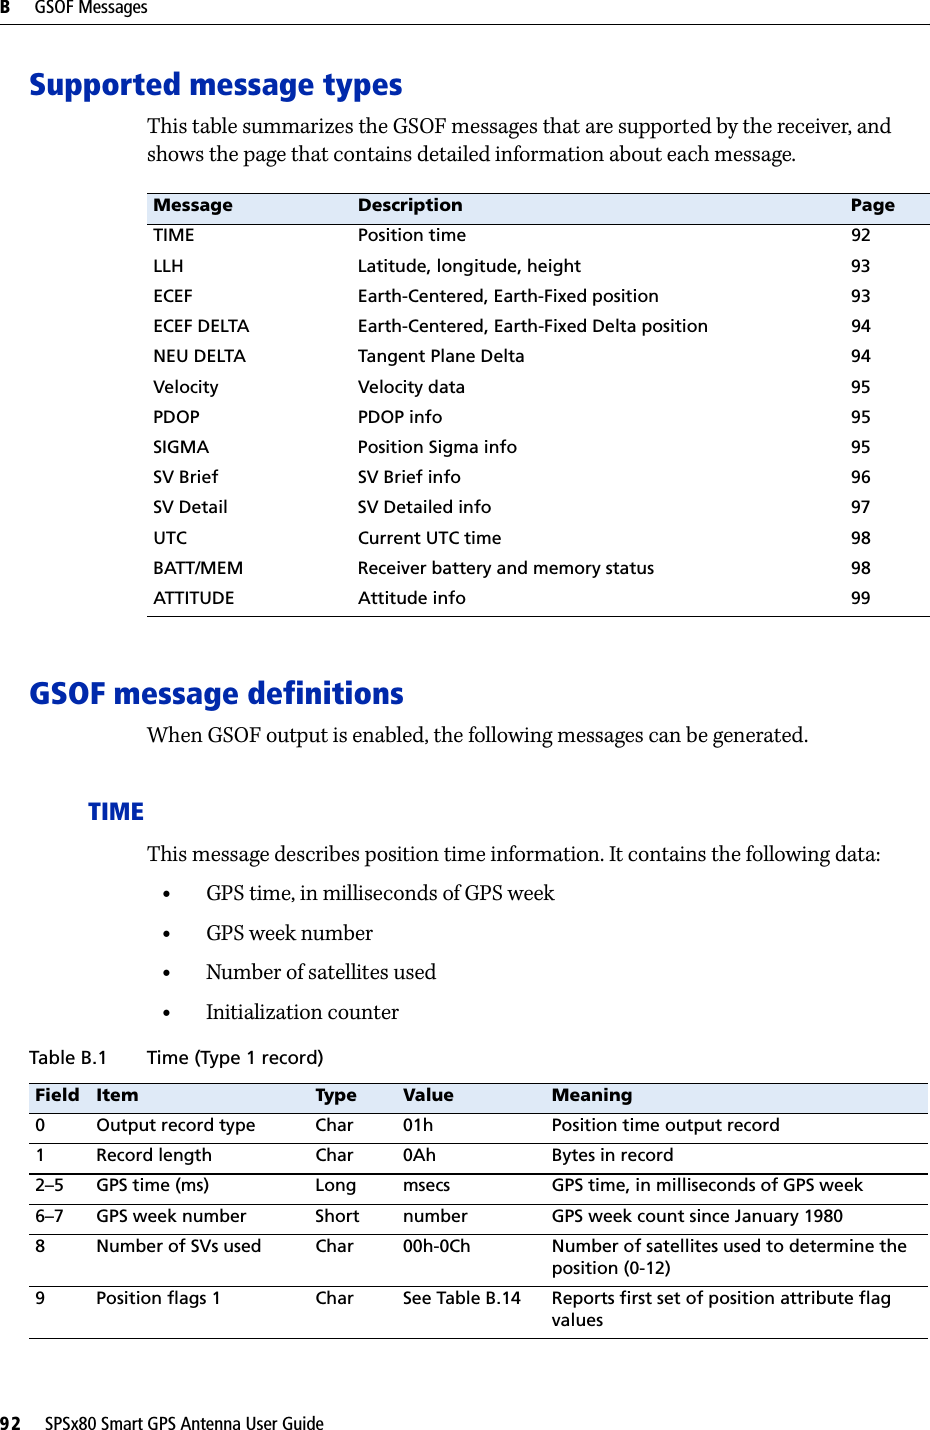 B     GSOF Messages92     SPSx80 Smart GPS Antenna User GuideSupported message typesThis table summarizes the GSOF messages that are supported by the receiver, and shows the page that contains detailed information about each message.GSOF message definitionsWhen GSOF output is enabled, the following messages can be generated.TIMEThis message describes position time information. It contains the following data:•GPS time, in milliseconds of GPS week•GPS week number•Number of satellites used•Initialization counterMessage  Description PageTIME Position time 92LLH Latitude, longitude, height 93ECEF Earth-Centered, Earth-Fixed position 93ECEF DELTA Earth-Centered, Earth-Fixed Delta position 94NEU DELTA Tangent Plane Delta 94Velocity Velocity data 95PDOP PDOP info 95SIGMA Position Sigma info 95SV Brief SV Brief info 96SV Detail SV Detailed info 97UTC Current UTC time 98BATT/MEM Receiver battery and memory status 98ATTITUDE Attitude info 99Table B.1 Time (Type 1 record)Field Item Type Value Meaning0 Output record type Char 01h Position time output record1 Record length Char 0Ah Bytes in record2–5 GPS time (ms) Long msecs GPS time, in milliseconds of GPS week6–7 GPS week number Short number GPS week count since January 19808 Number of SVs used Char 00h-0Ch Number of satellites used to determine the position (0-12)9 Position flags 1 Char See Table B.14 Reports first set of position attribute flag values